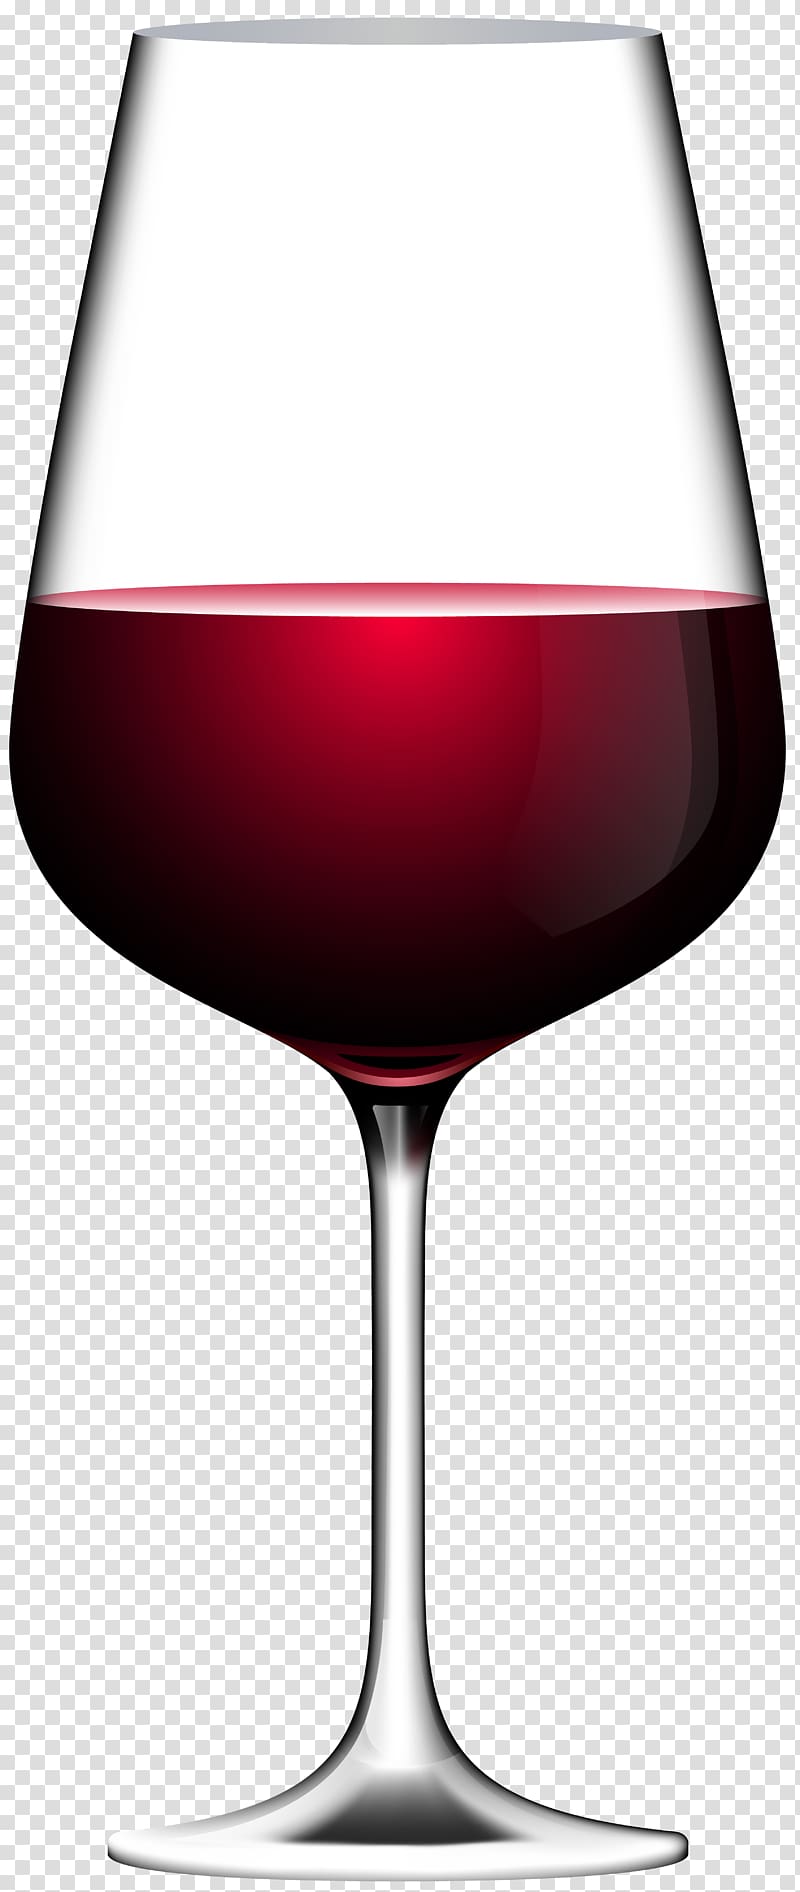 wine glass illustration, Red Wine Champagne Wine glass , Red Wine Glass transparent background PNG clipart